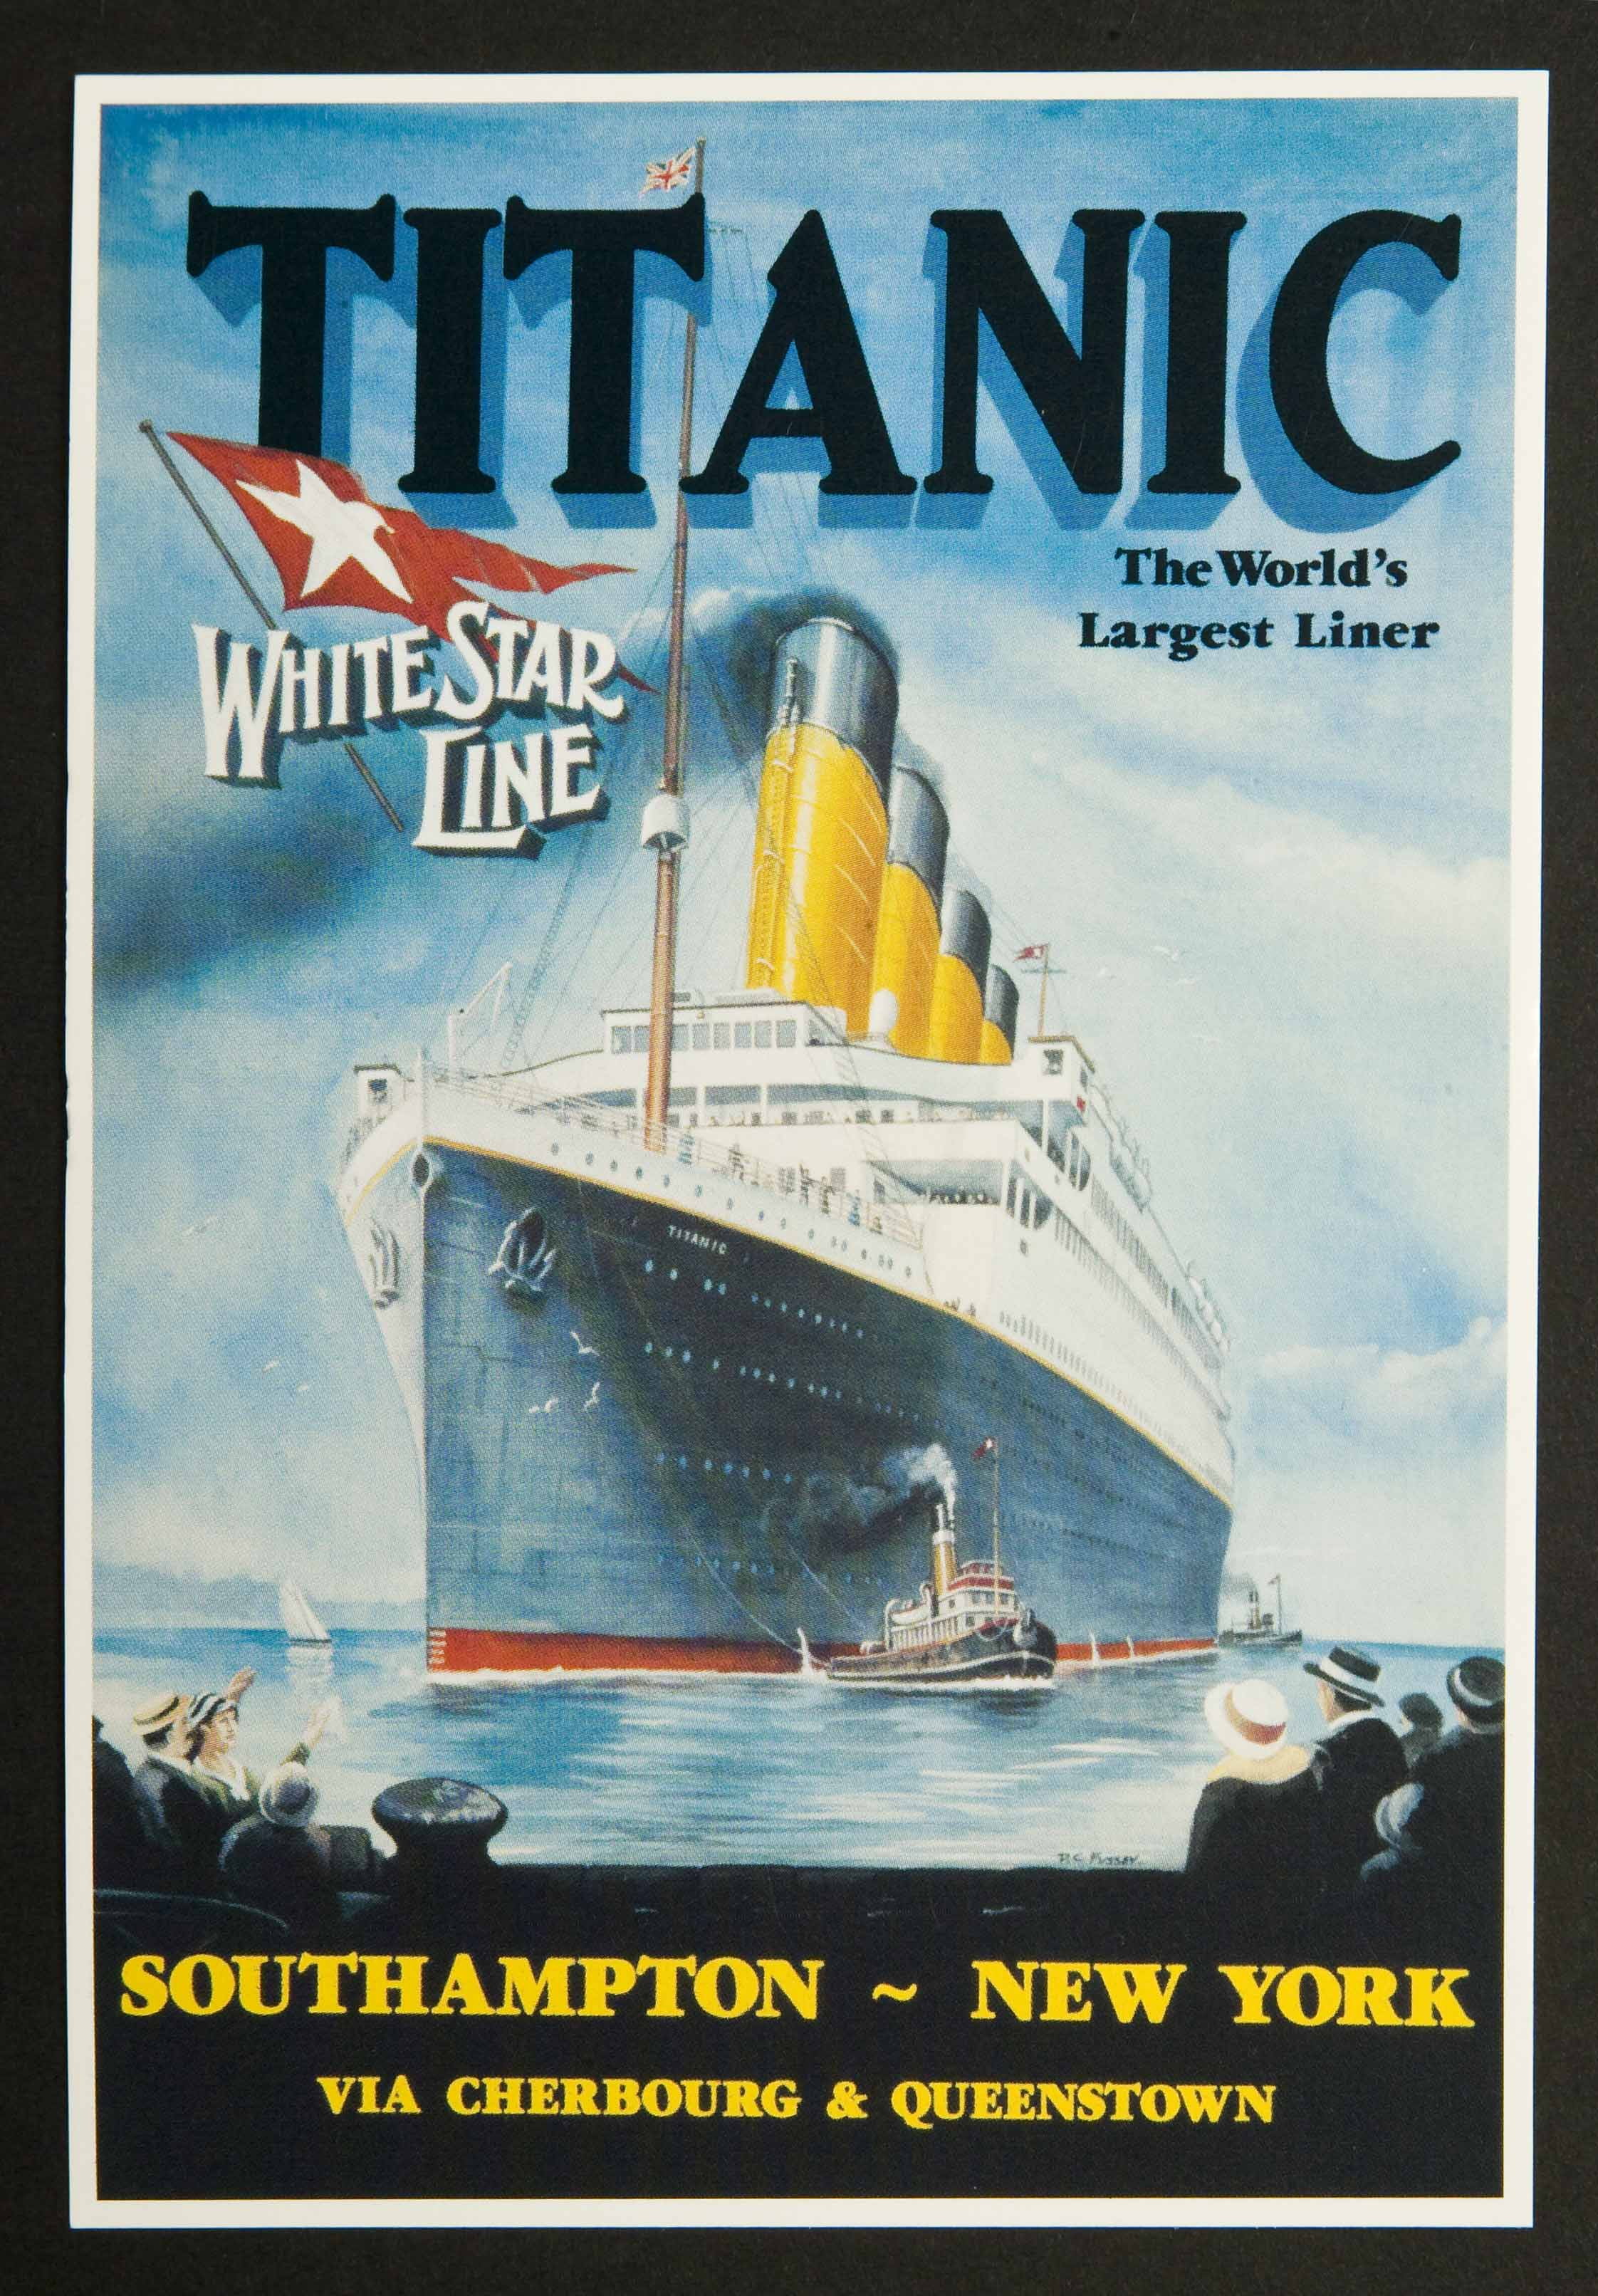 Titanic - The World's Largest Liner A3 Poster